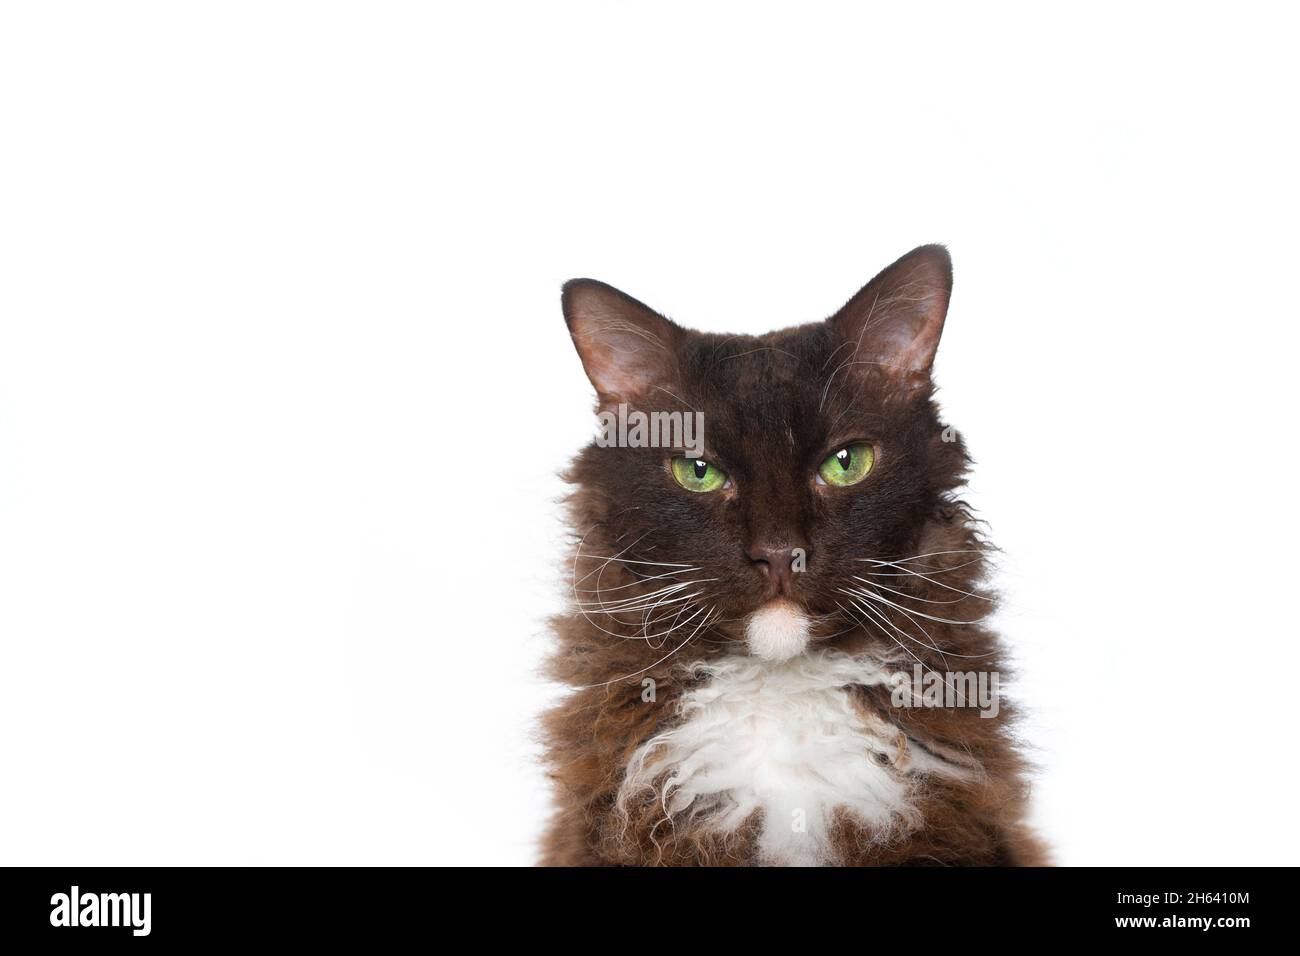 chocolate white laperm cat with curly longhair fur and green eyes looking at camera isolated on white background Stock Photo